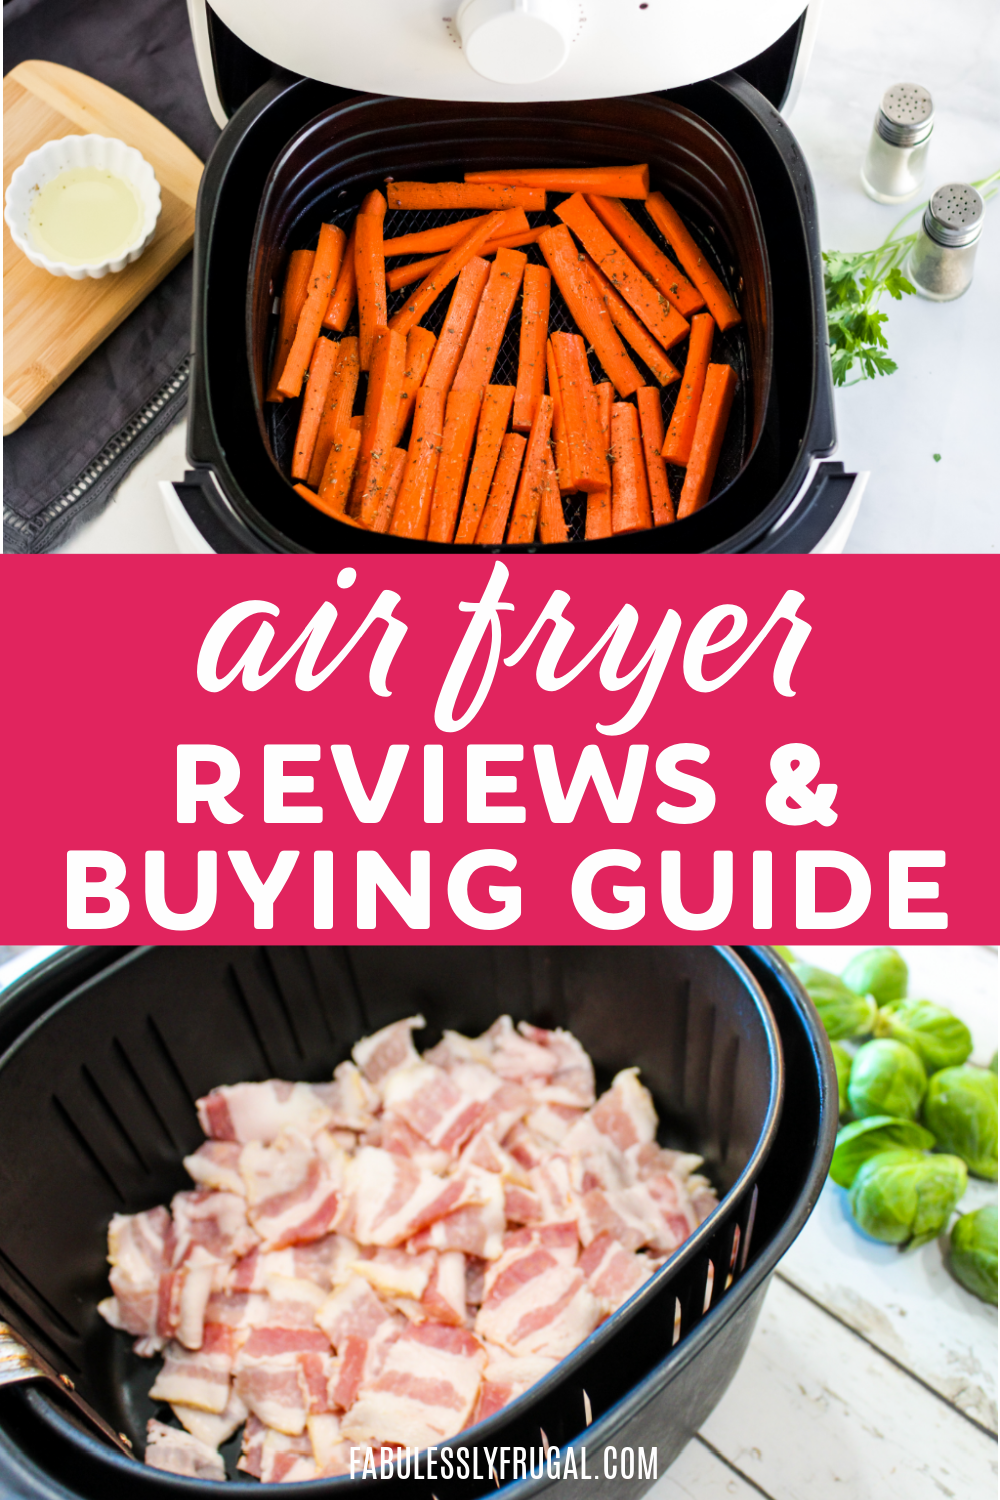 Air Fryer Buying Guide: The Different Types and the Models We Recommend